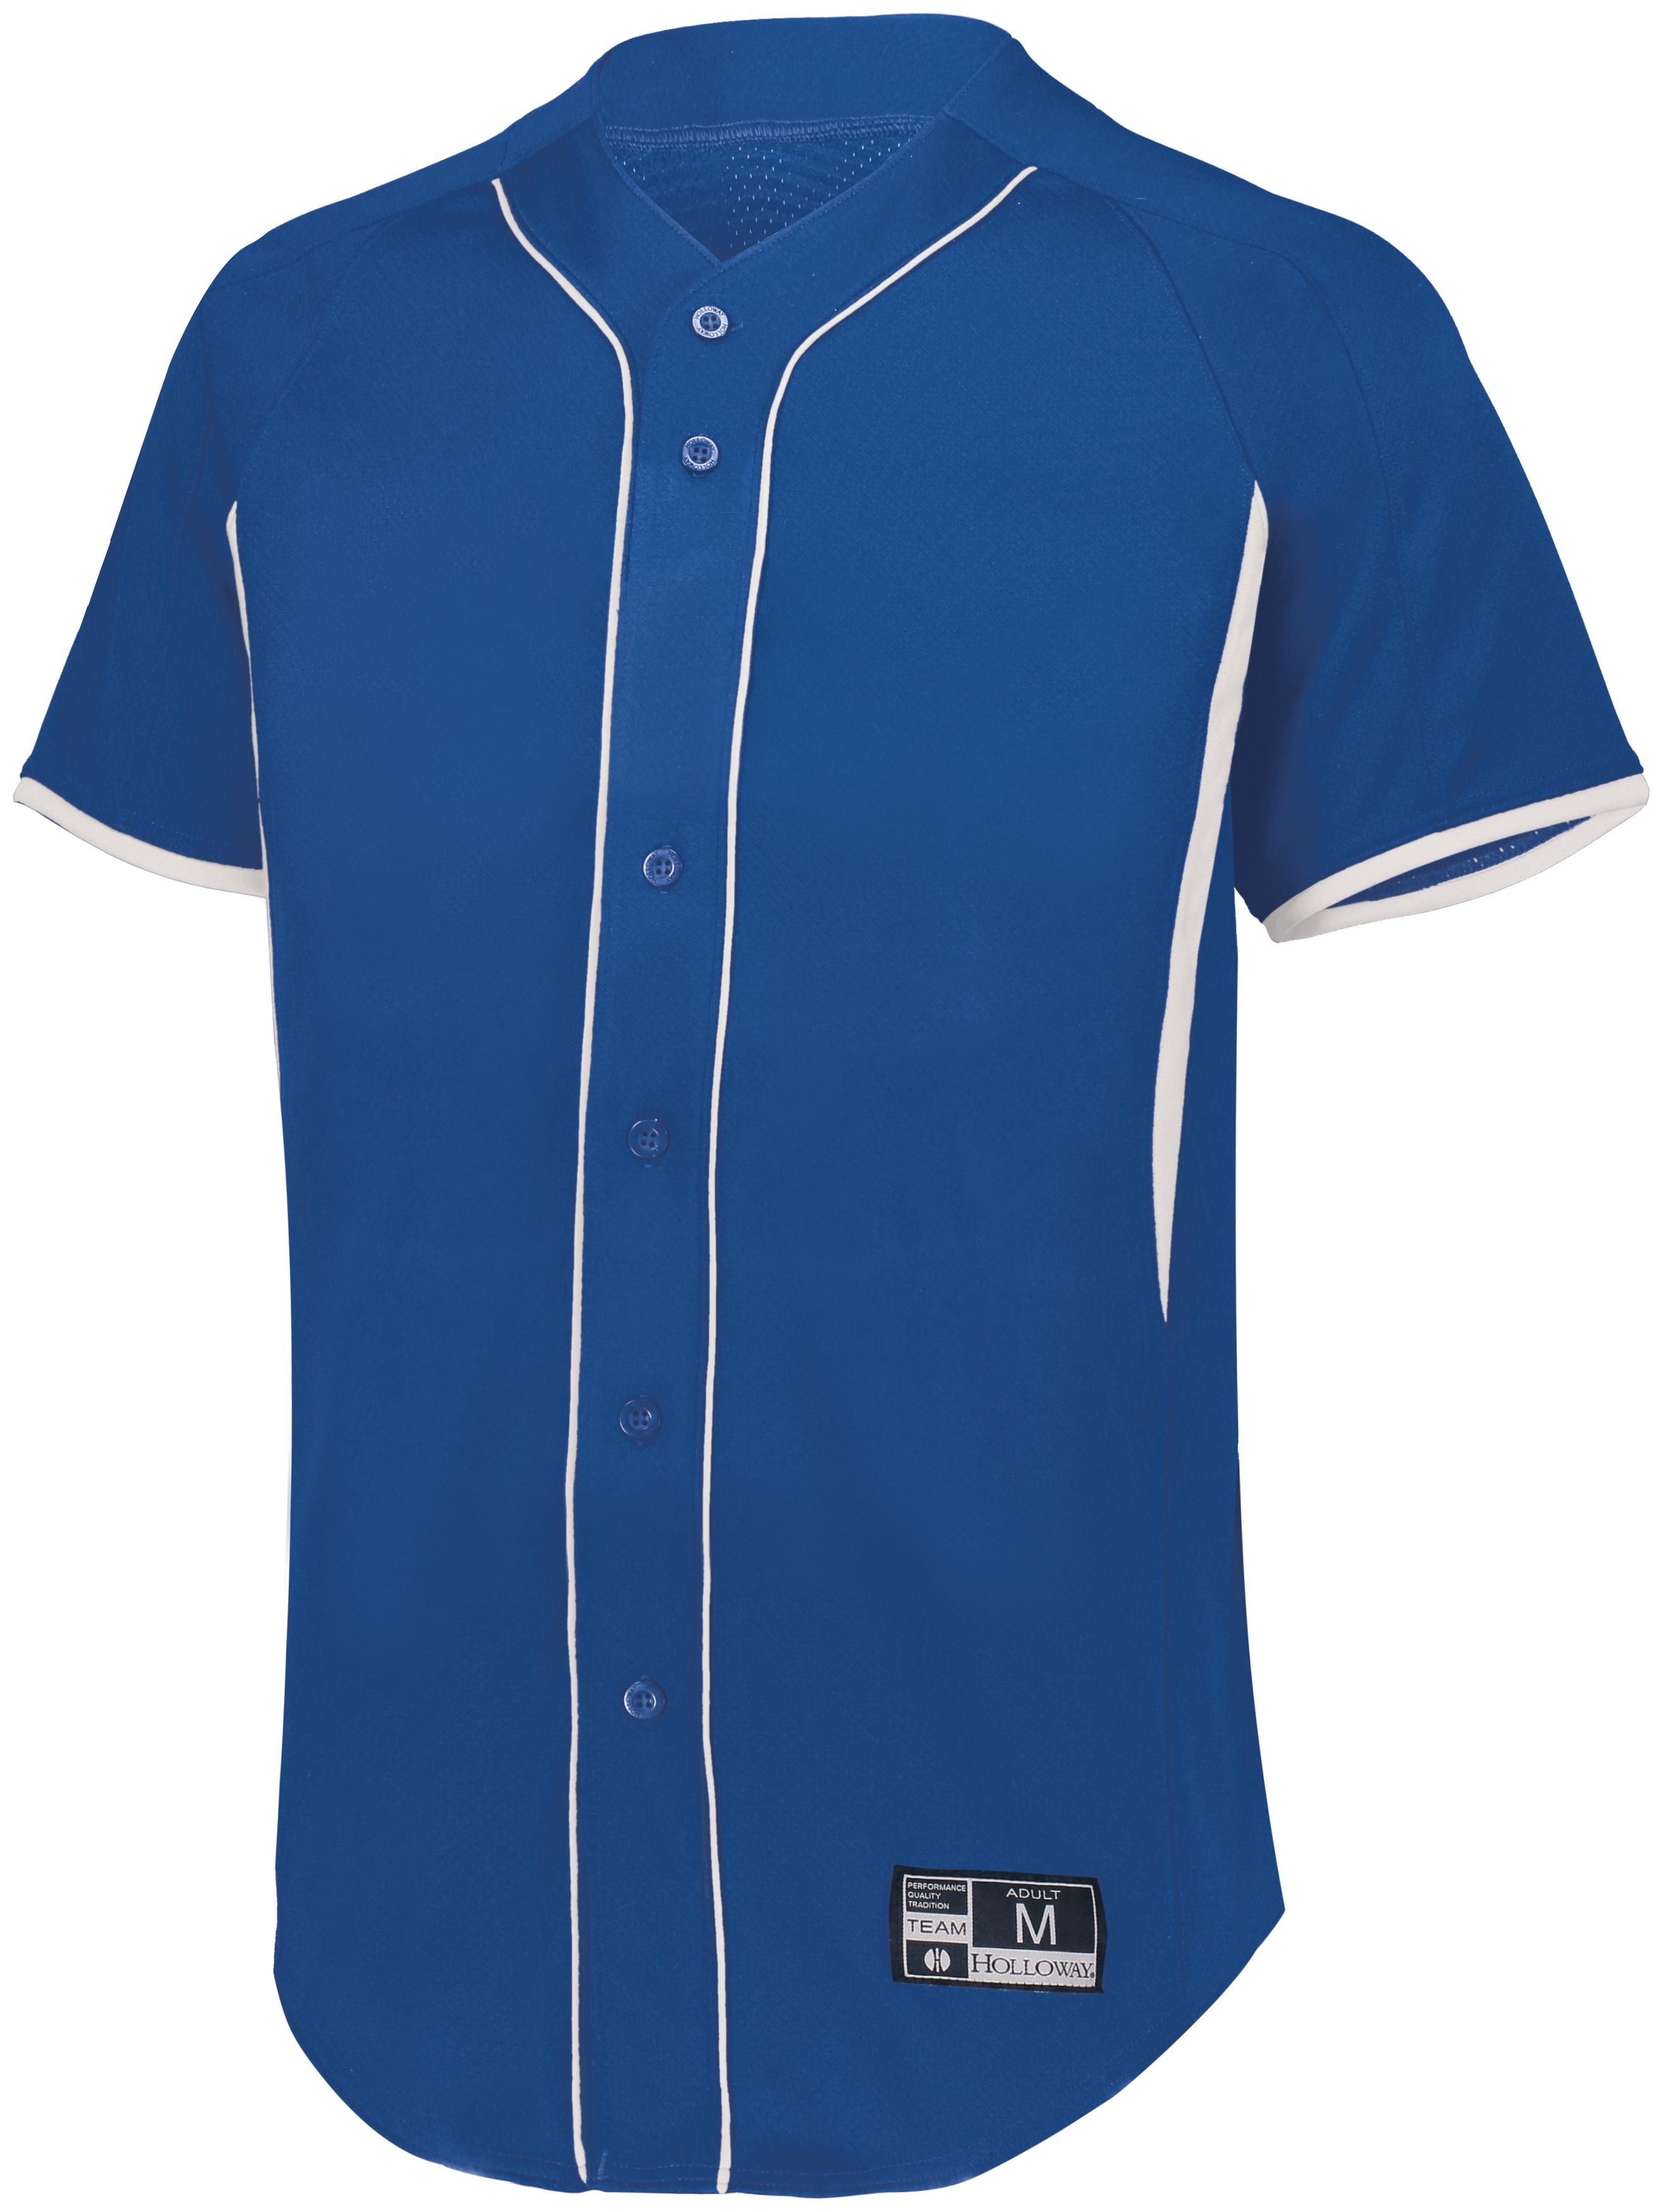 Holloway Game7 Full-Button Baseball Jersey in Royal/White  -Part of the Adult, Adult-Jersey, Baseball, Holloway, Shirts, All-Sports, All-Sports-1 product lines at KanaleyCreations.com